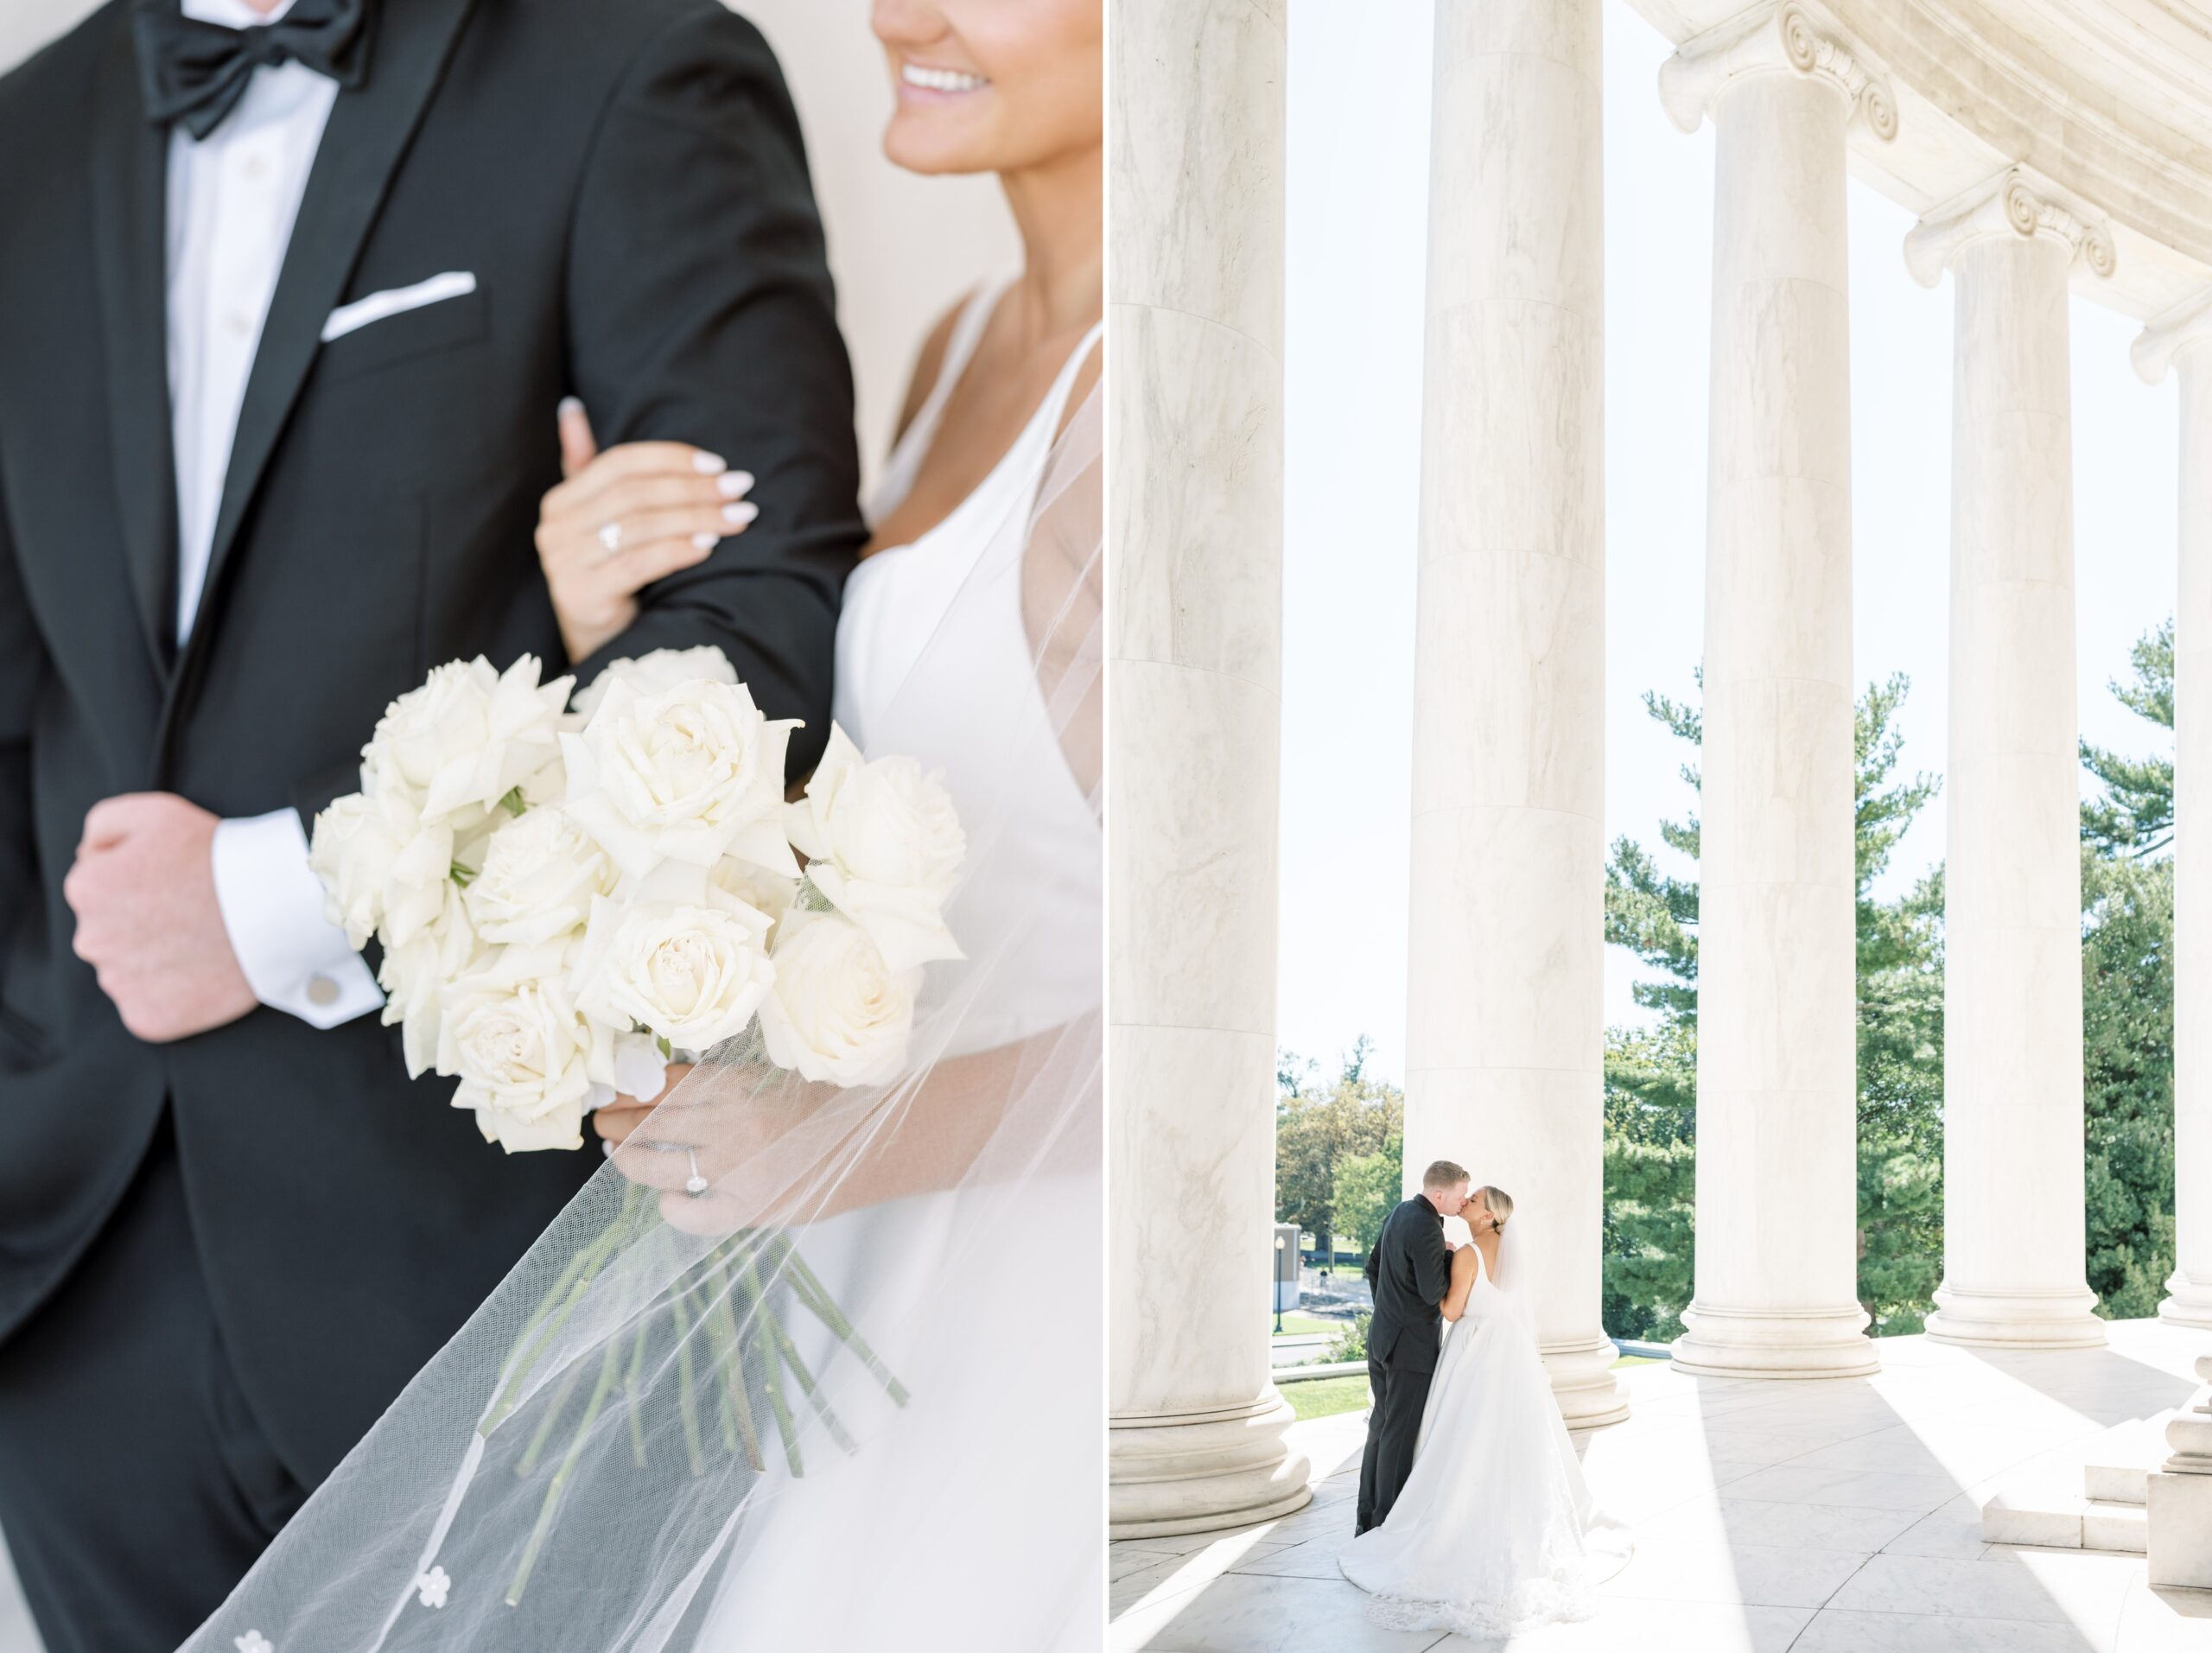 A chic black tie wedding at the downtown Conrad Hotel in Washington, DC. Portraits were captured at the iconic Jefferson Memorial.